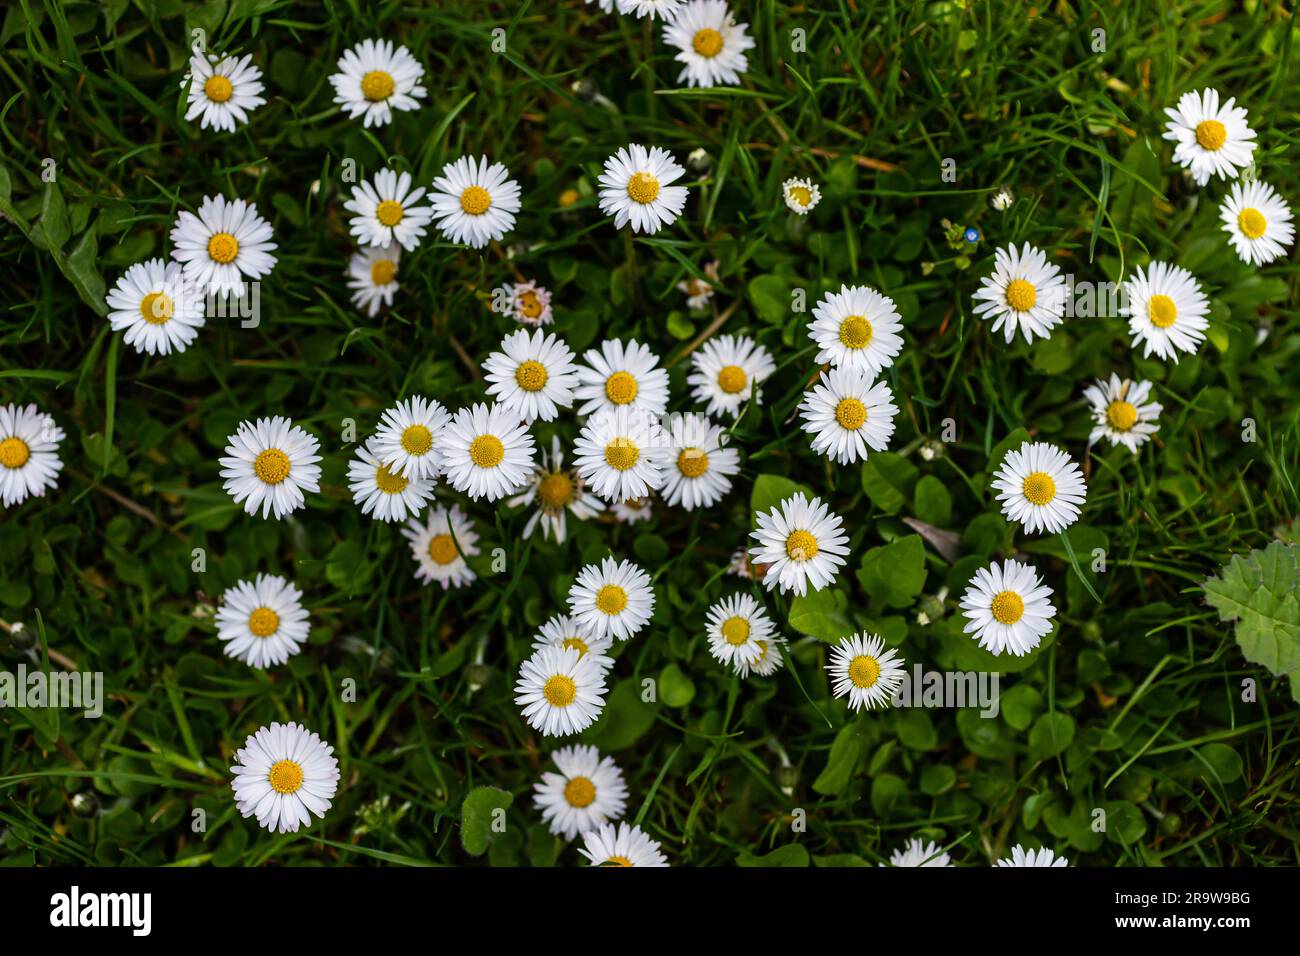 White daisies flowers growing together on a green lawn. Floral spring background. Stock Photo